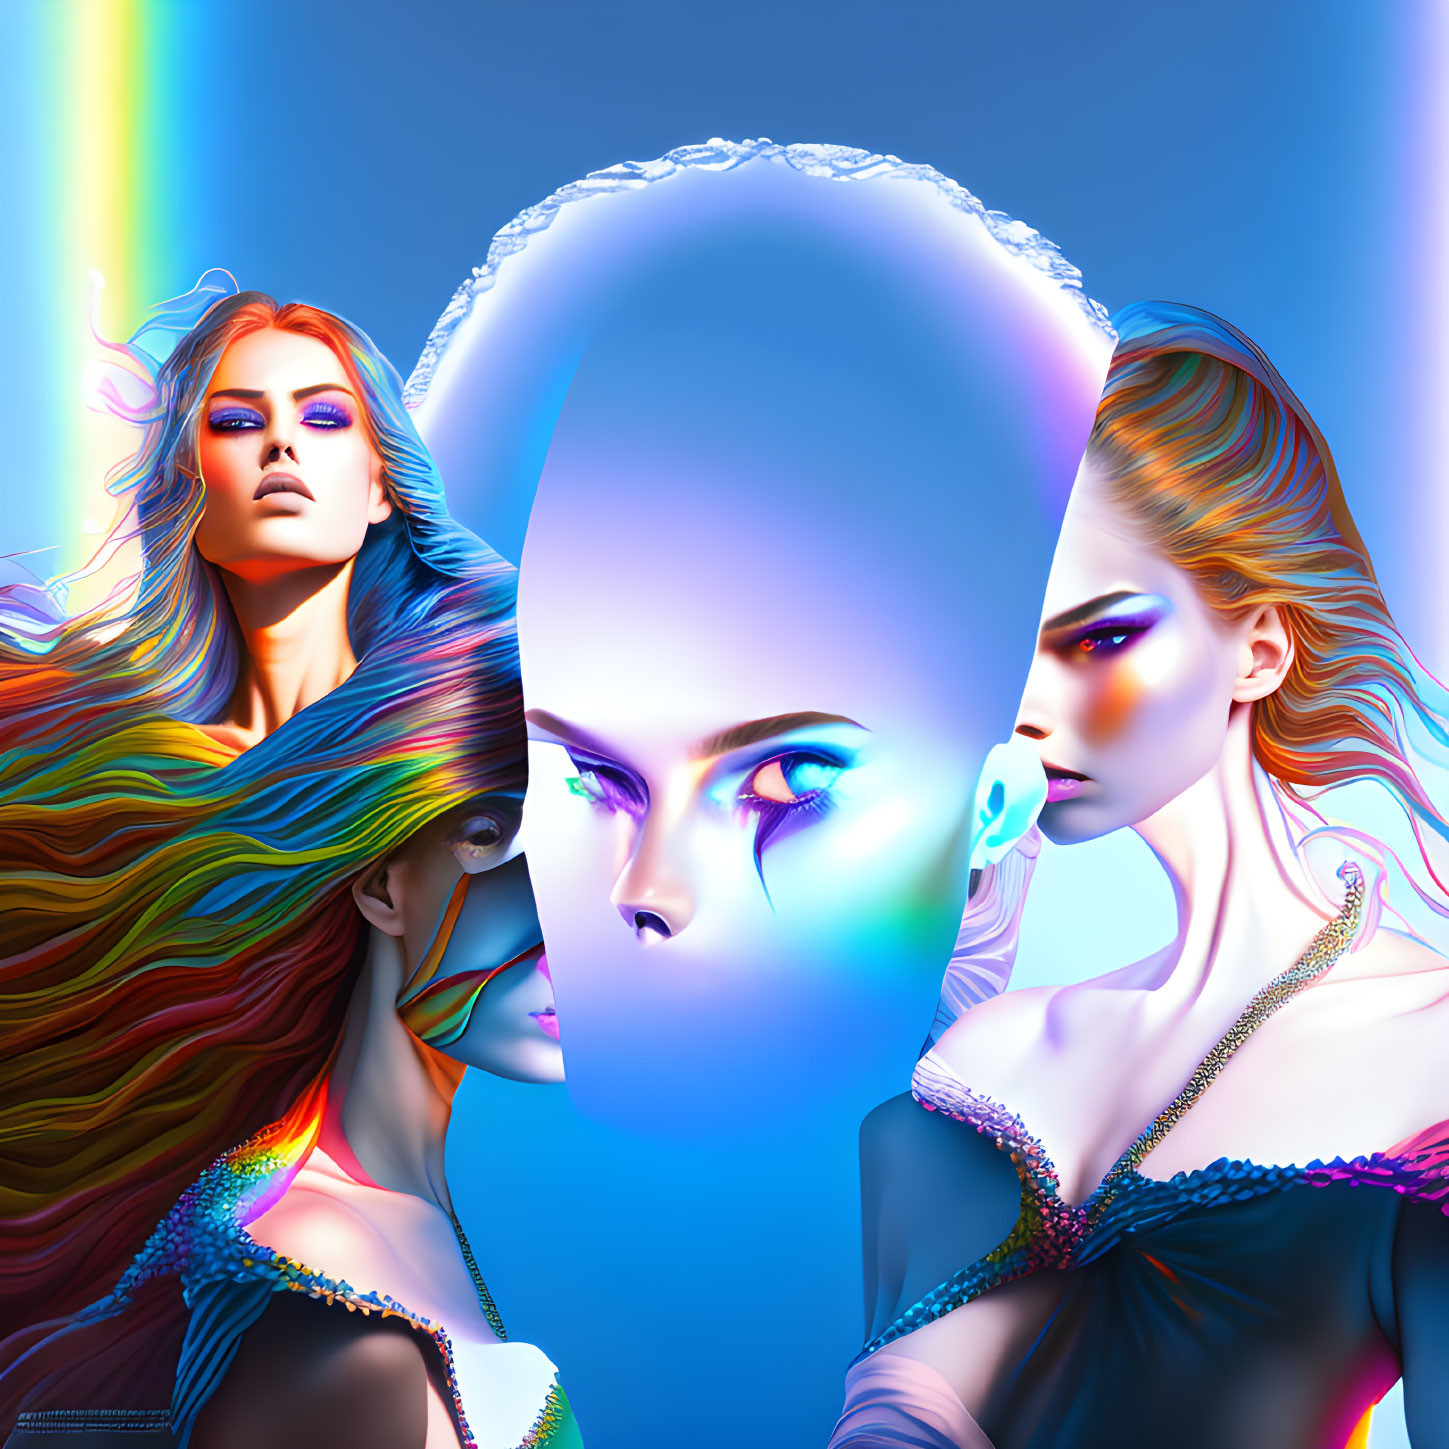 Colorful Digital Art: Three Stylized Female Faces with Flowing Hair